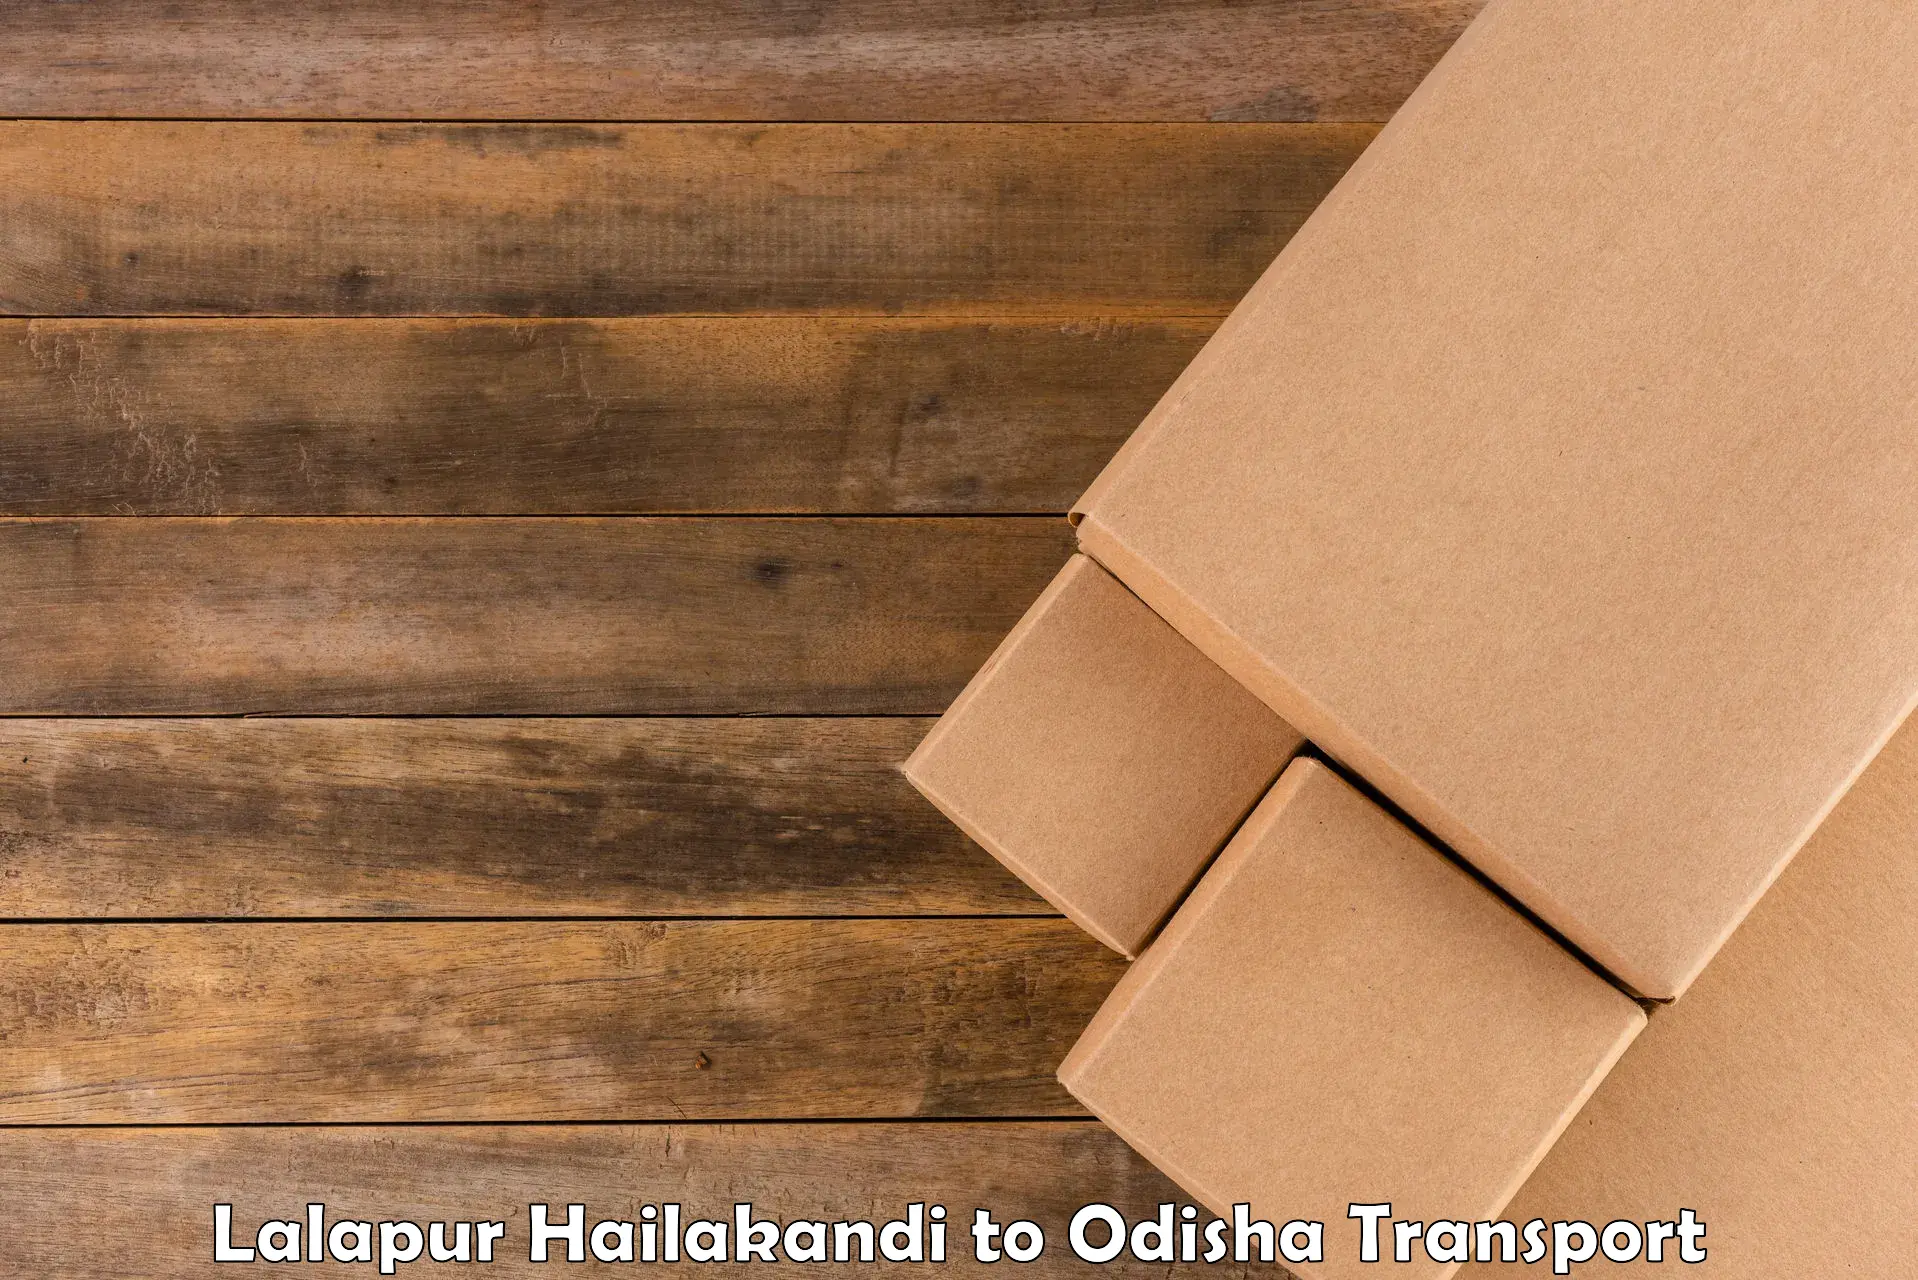 Transport bike from one state to another Lalapur Hailakandi to Jashipur